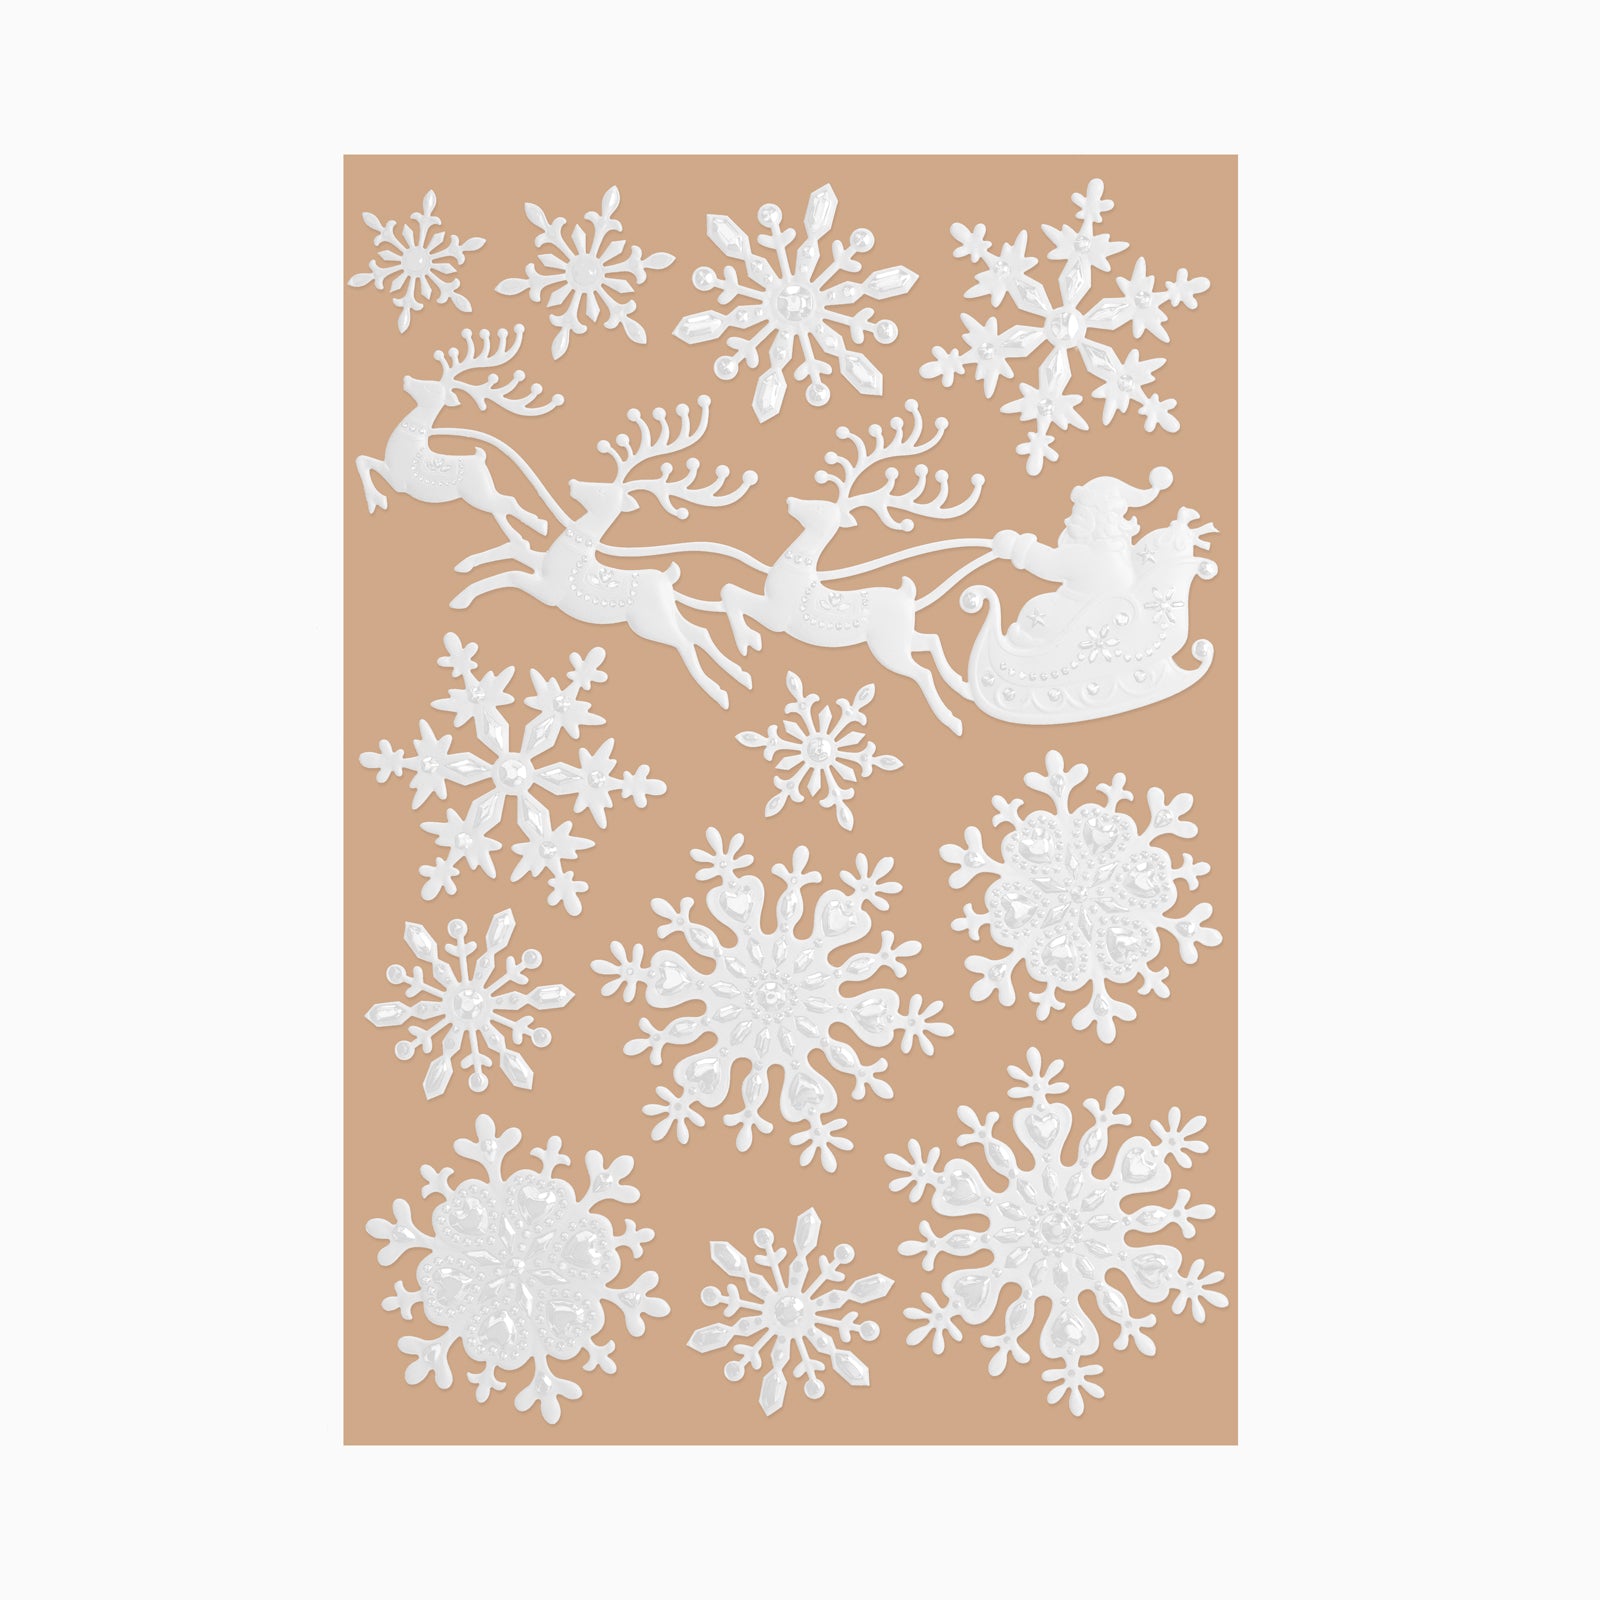 Christmas relief stickers and snowflakes